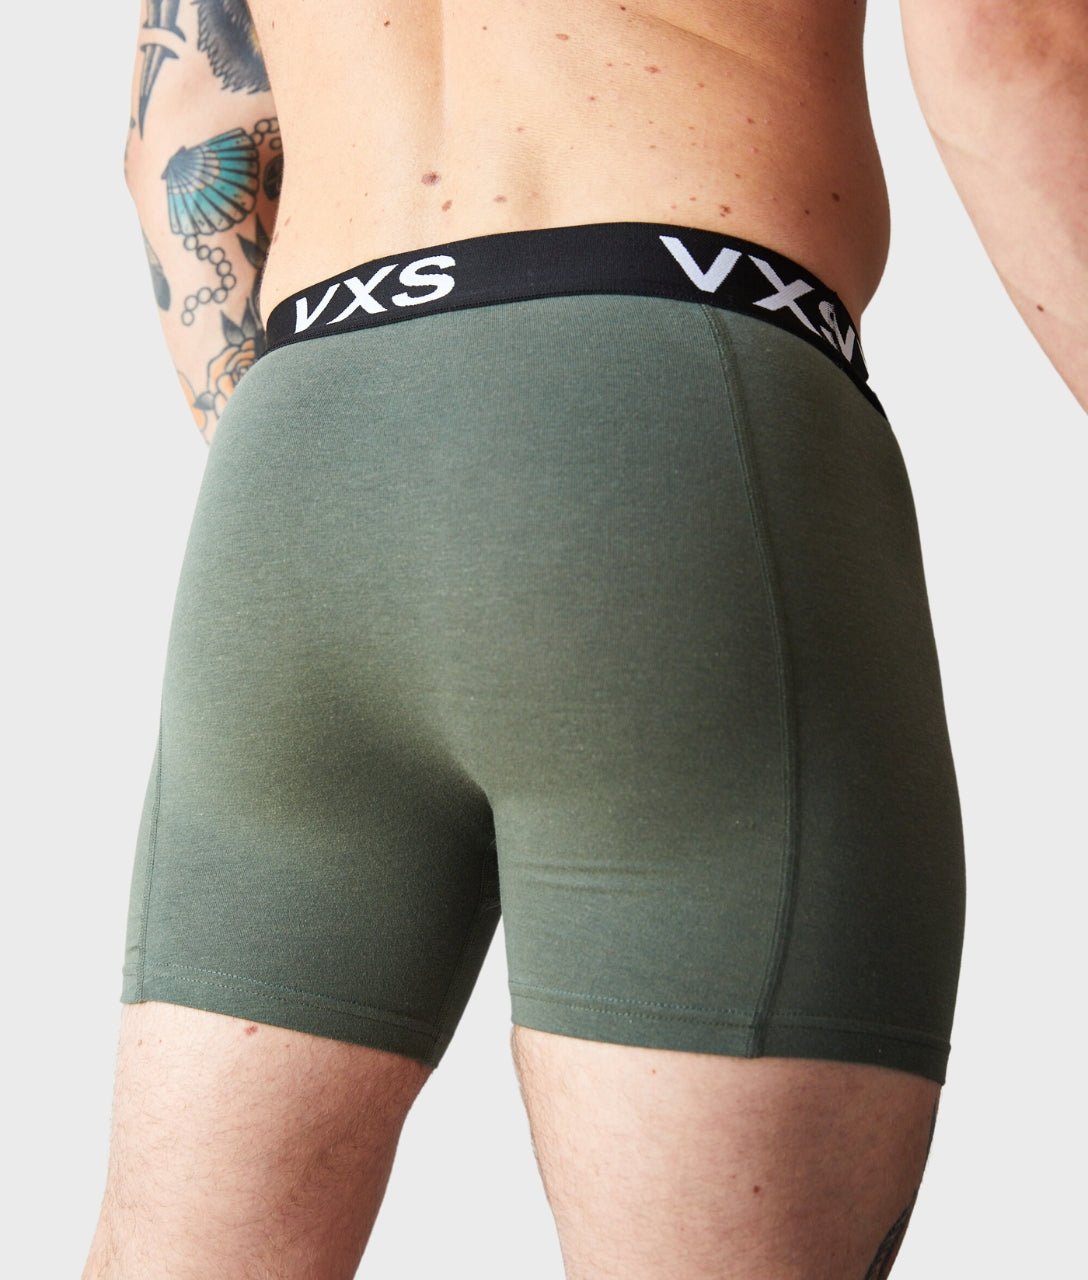 Bamboo Boxer Shorts 2 Pack [Olive/Black] - VXS GYM WEAR